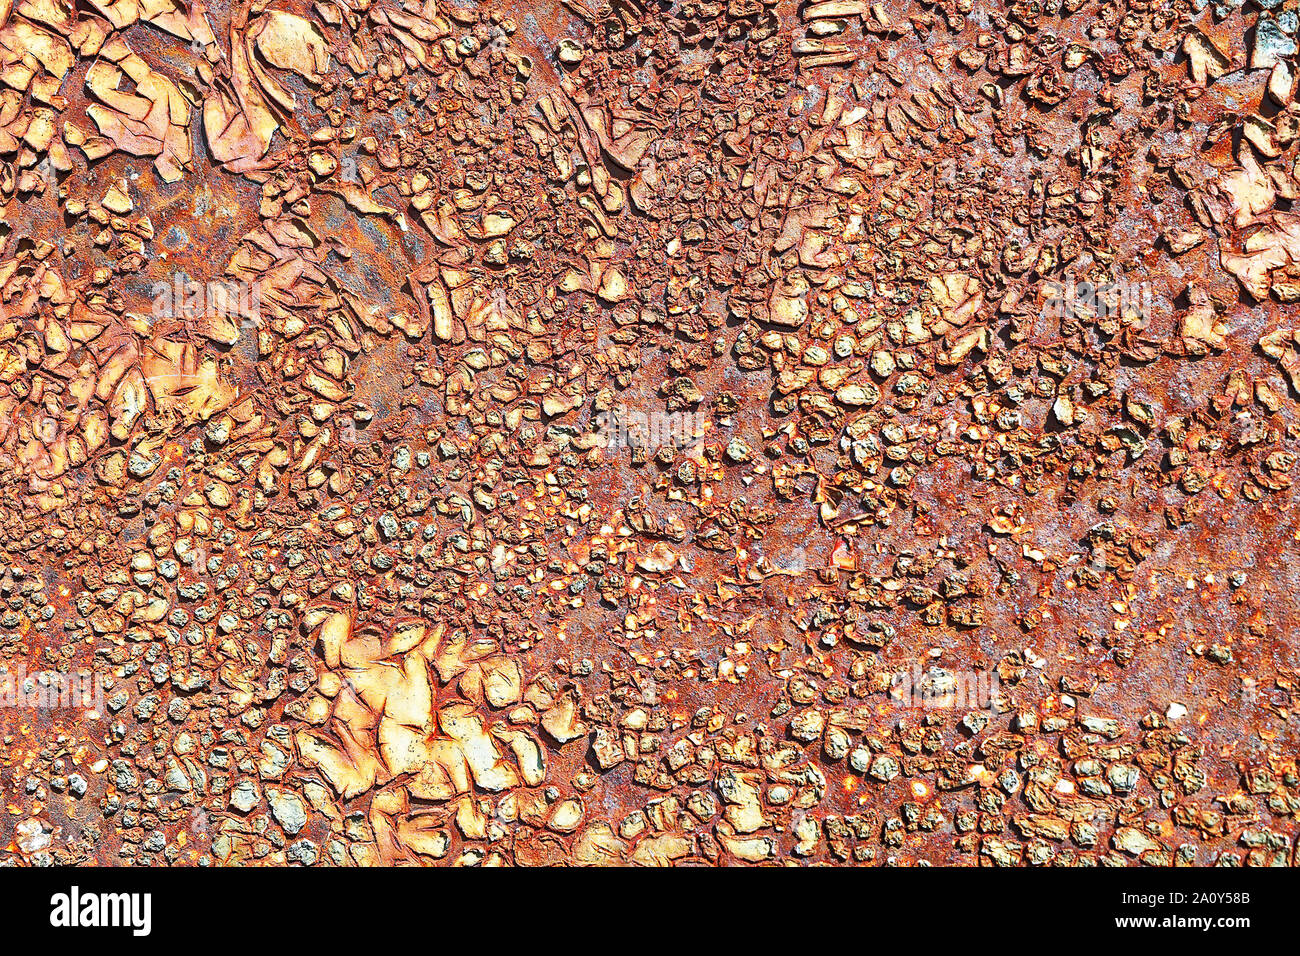 rusty surface of metallic board, effects of weather exposure Stock Photo